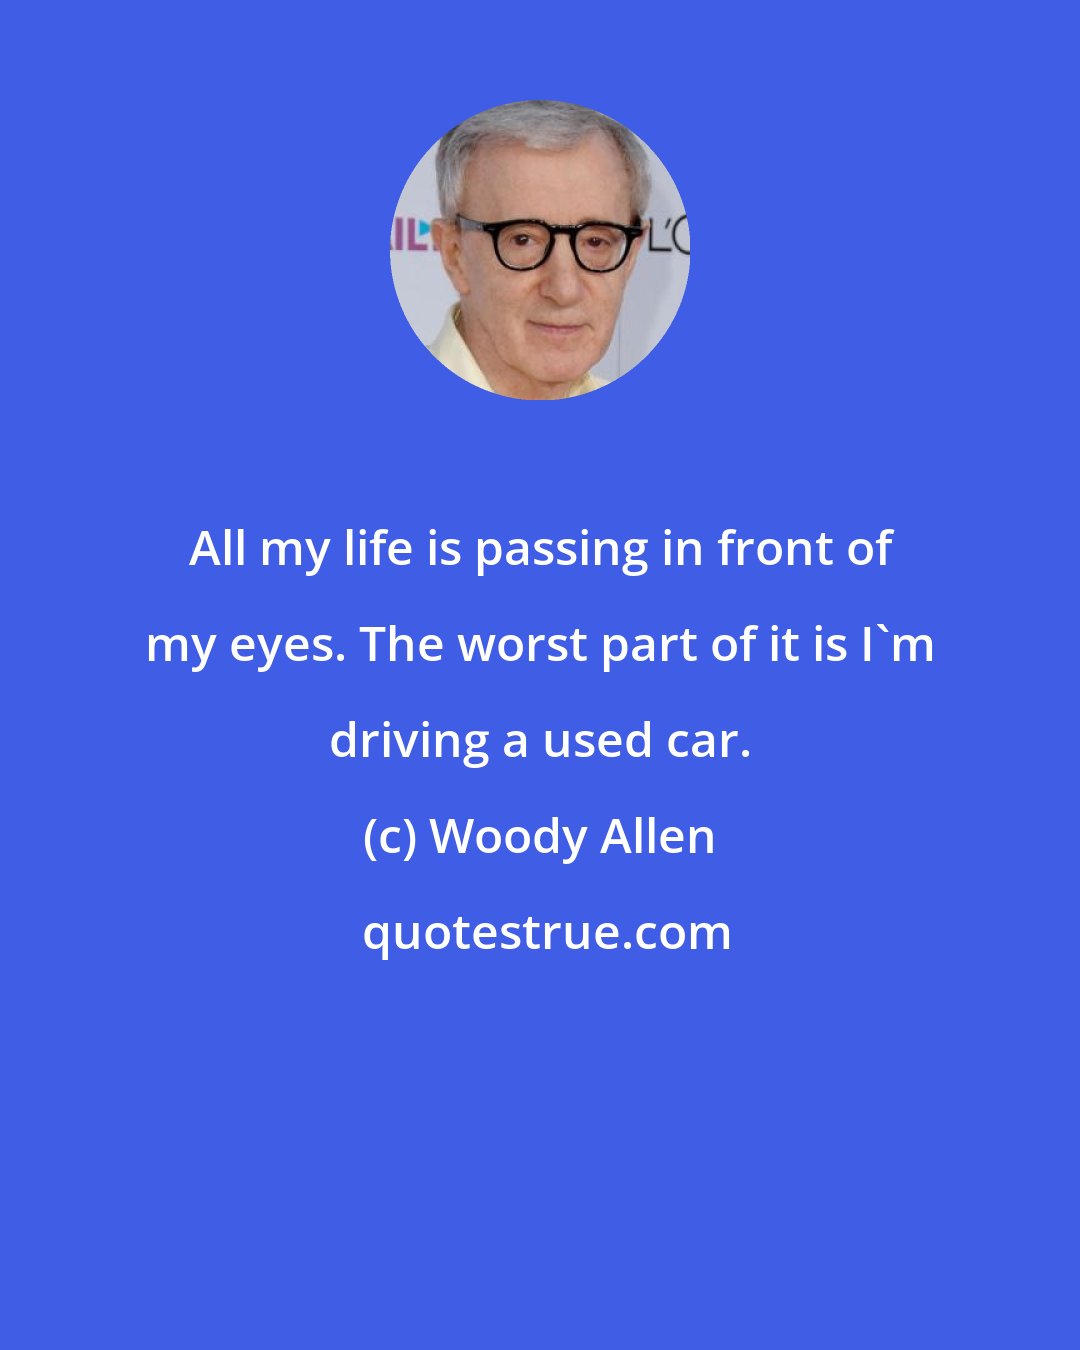 Woody Allen: All my life is passing in front of my eyes. The worst part of it is I'm driving a used car.